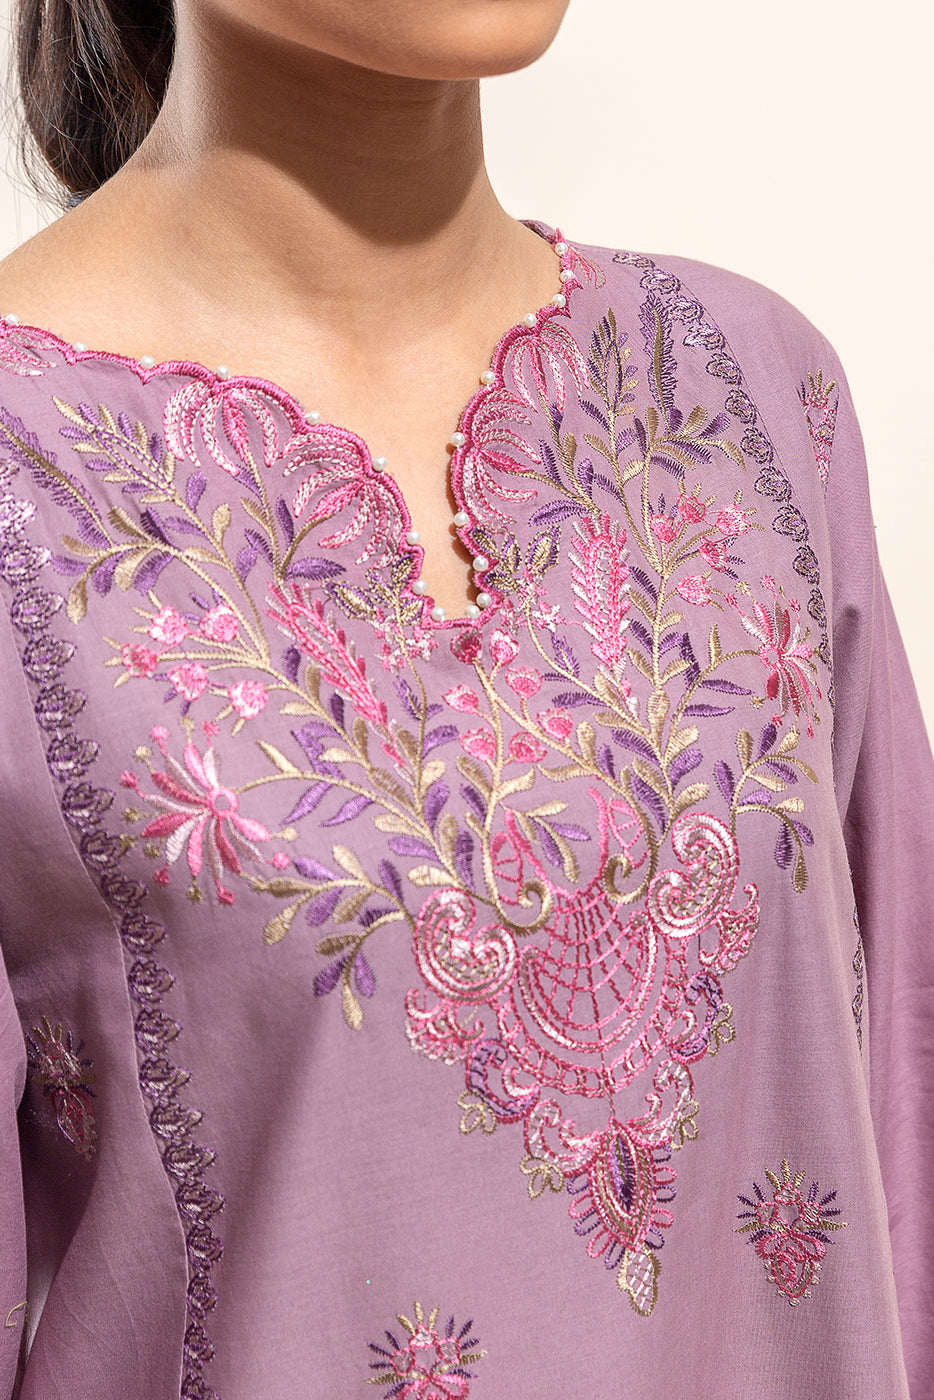 3 PIECE EMBROIDERED LAWN SUIT-ORCHID HAZE (UNSTITCHED)